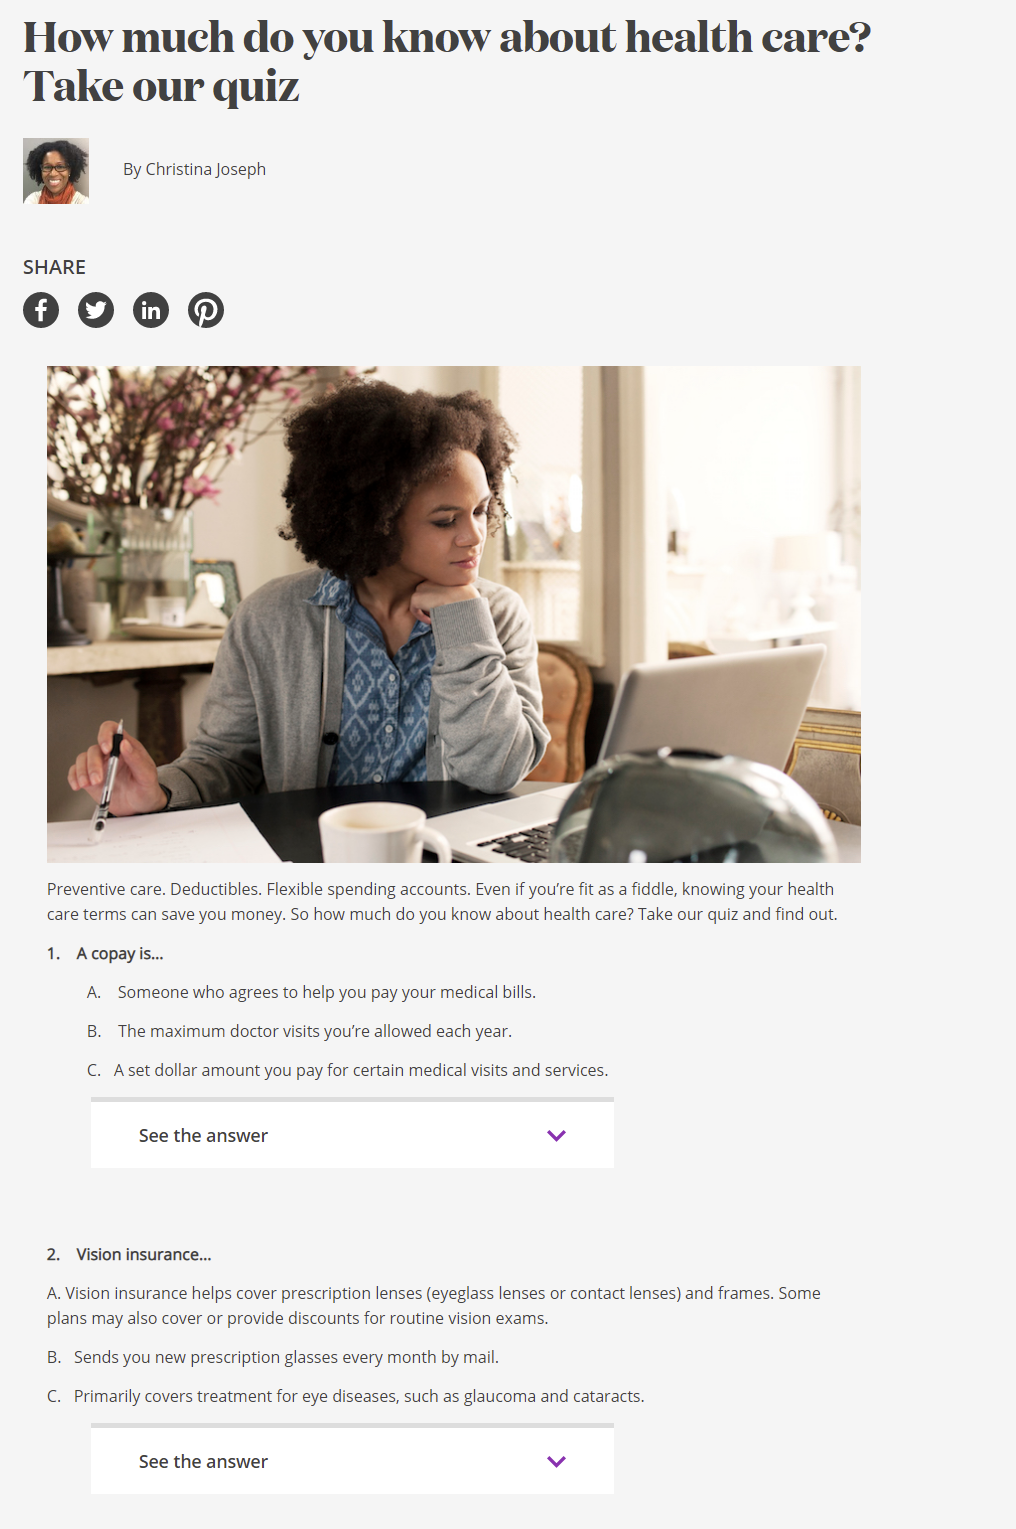 Aetna healthcare and insurance quiz